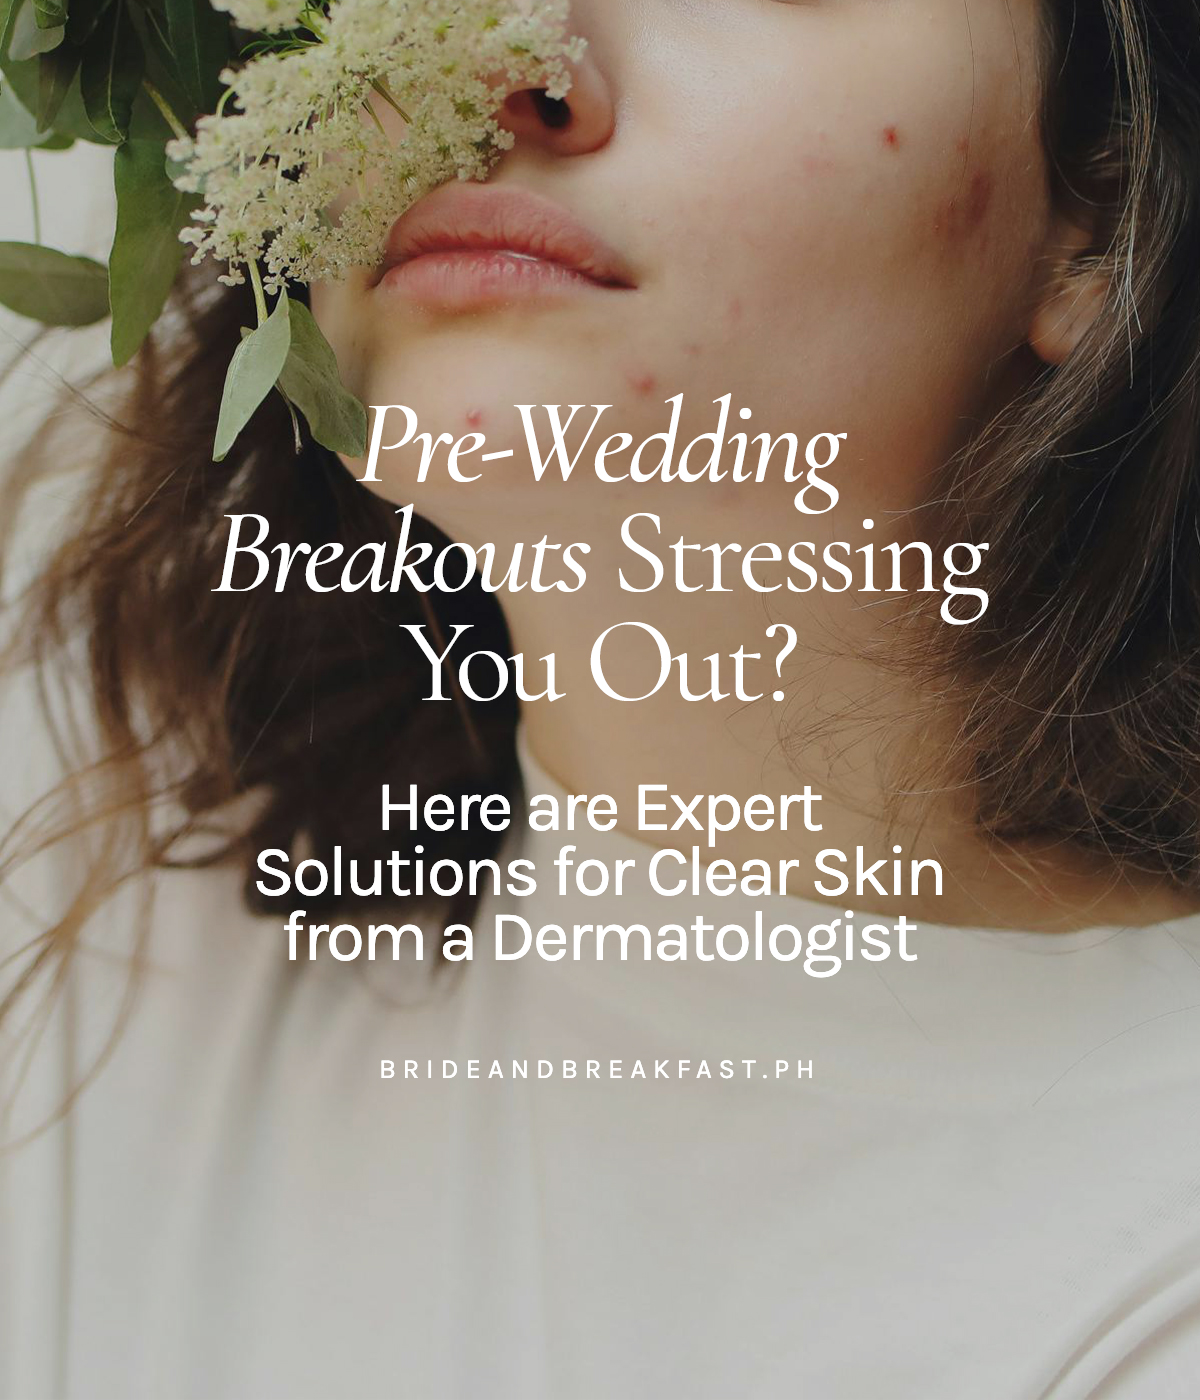 Pre-Wedding Breakouts Stressing You Out? Here are Expert Solutions for Clear Skin from a Dermatologist